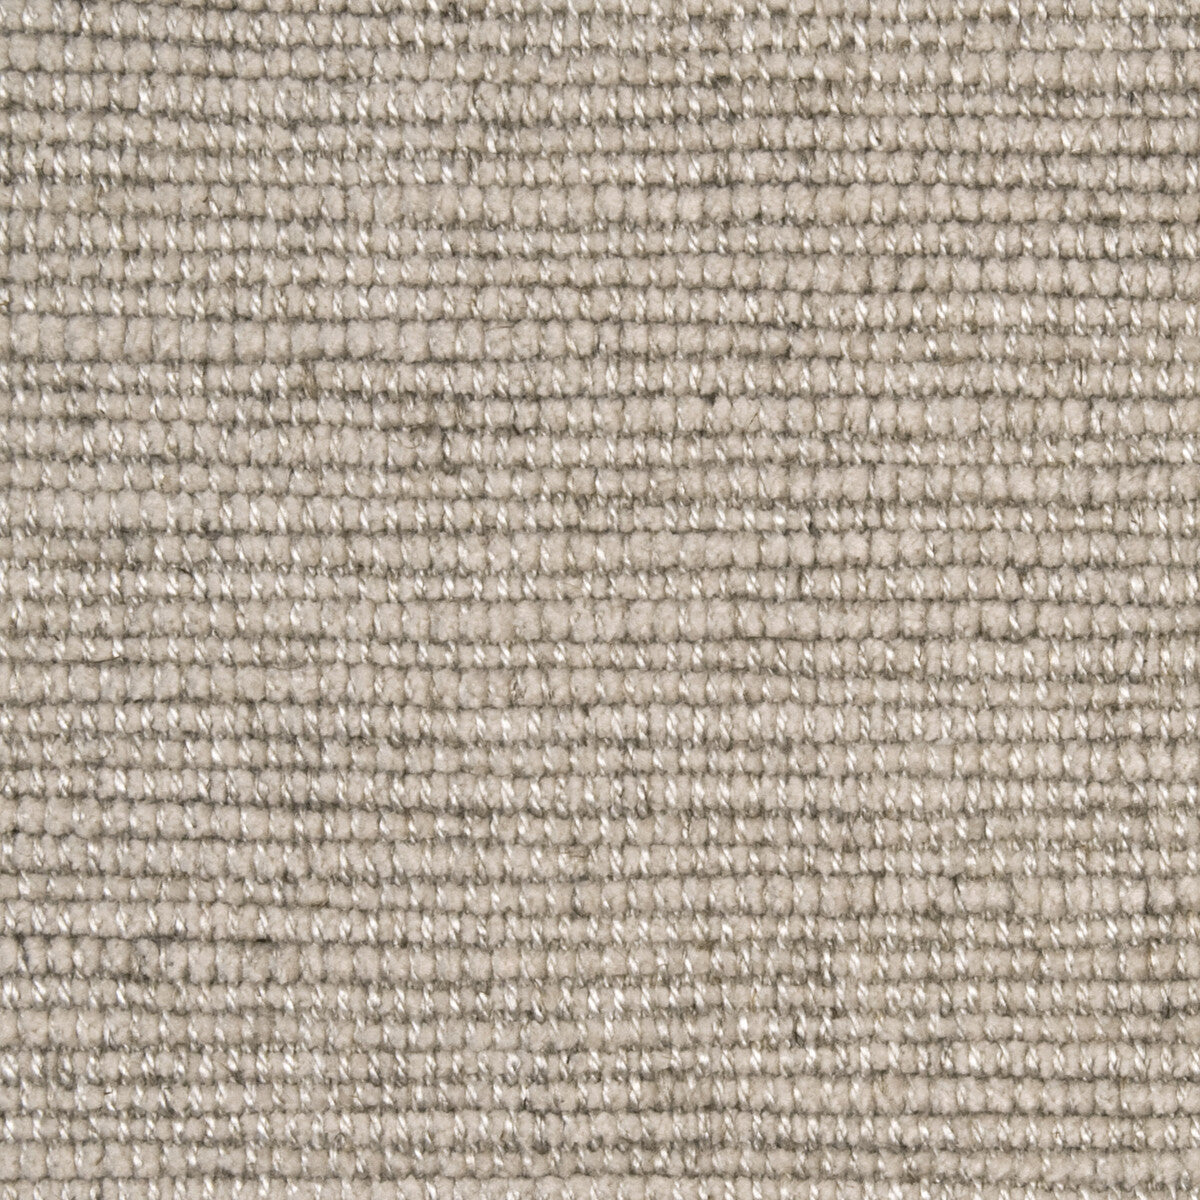 Charisma fabric in biscuit color - pattern ED85189.235.0 - by Threads in the Threads Colour Library collection